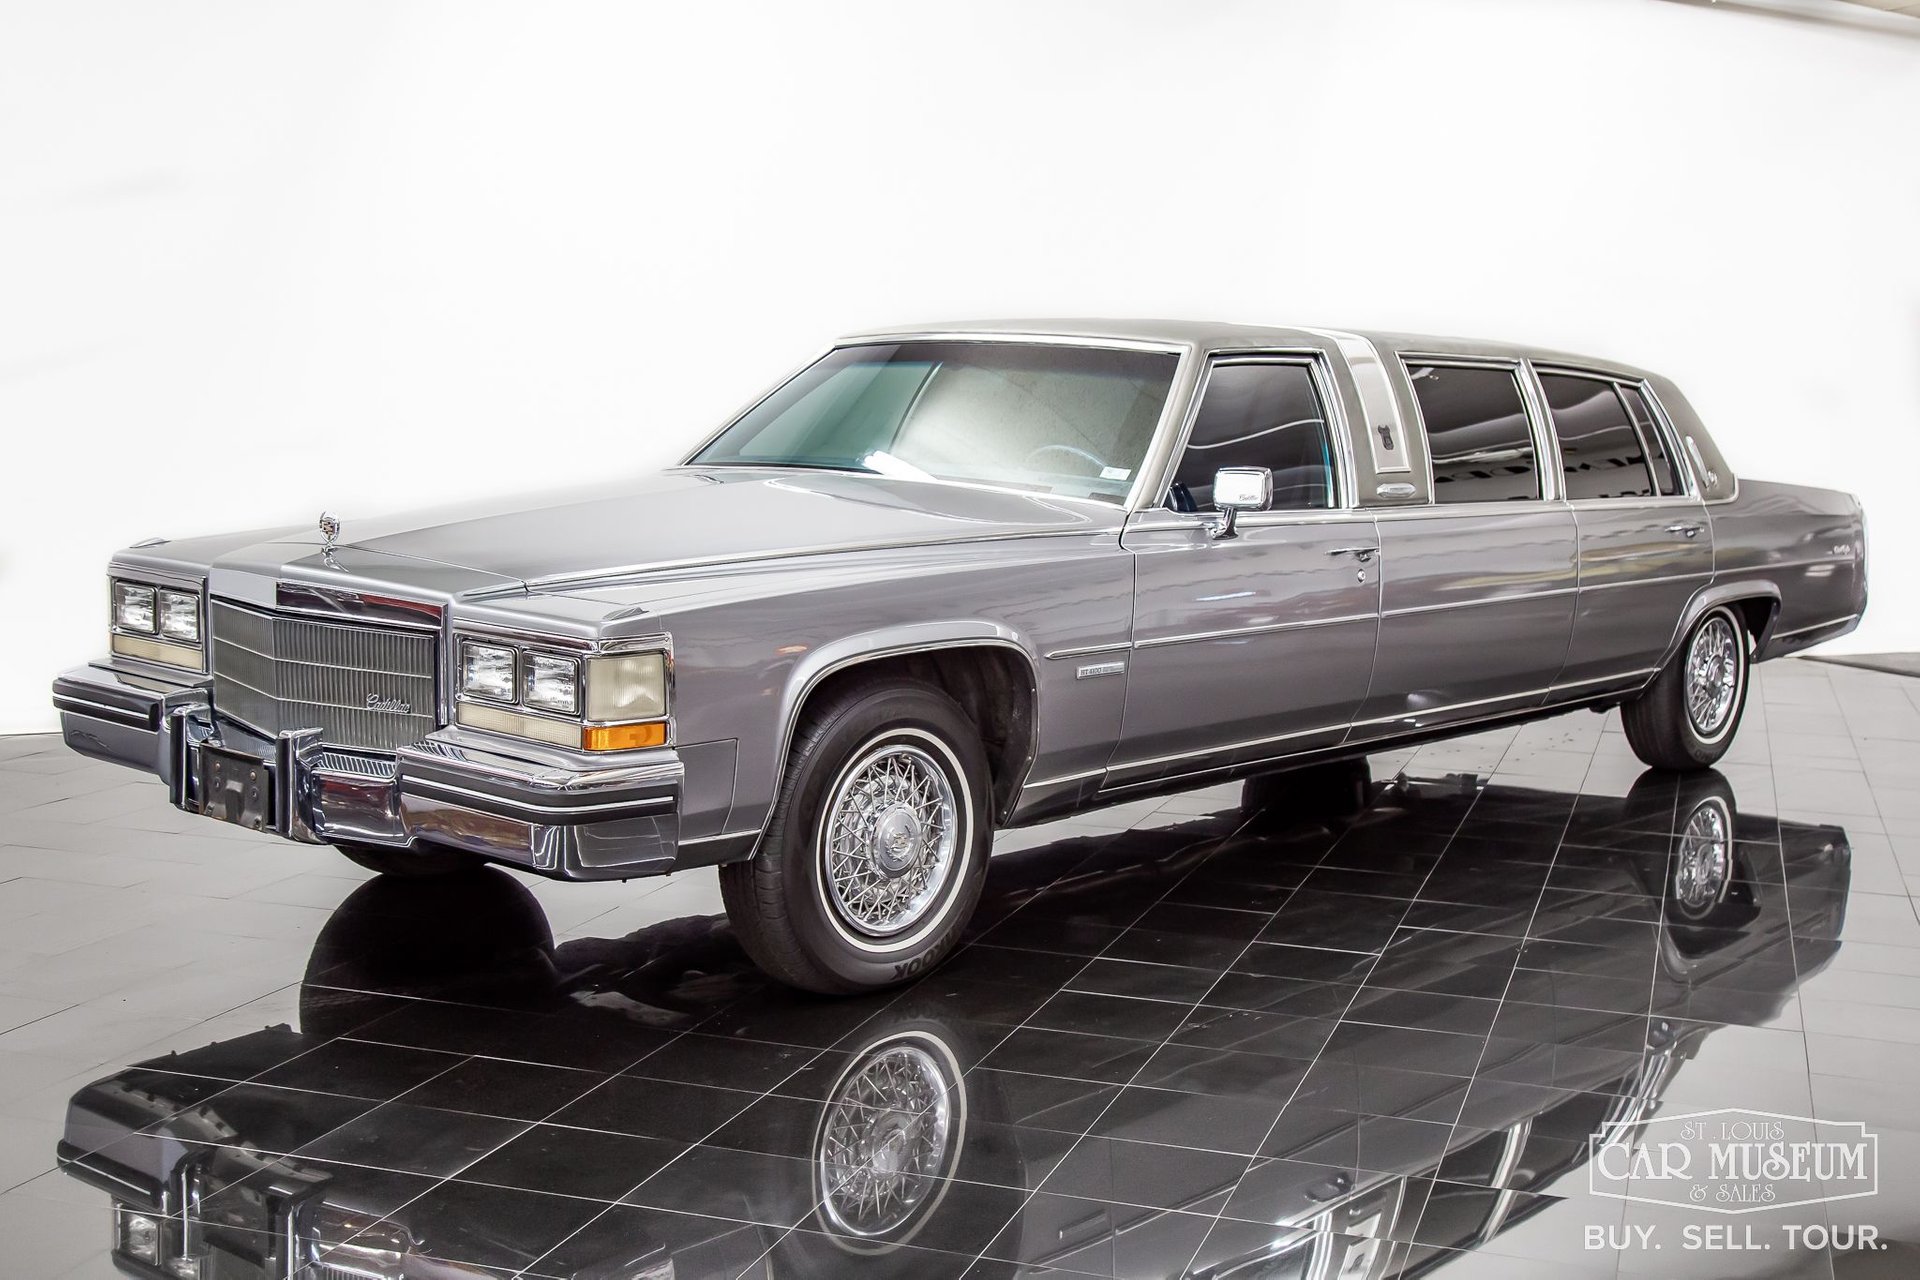 Best Cadillac Limo Model of All-Time